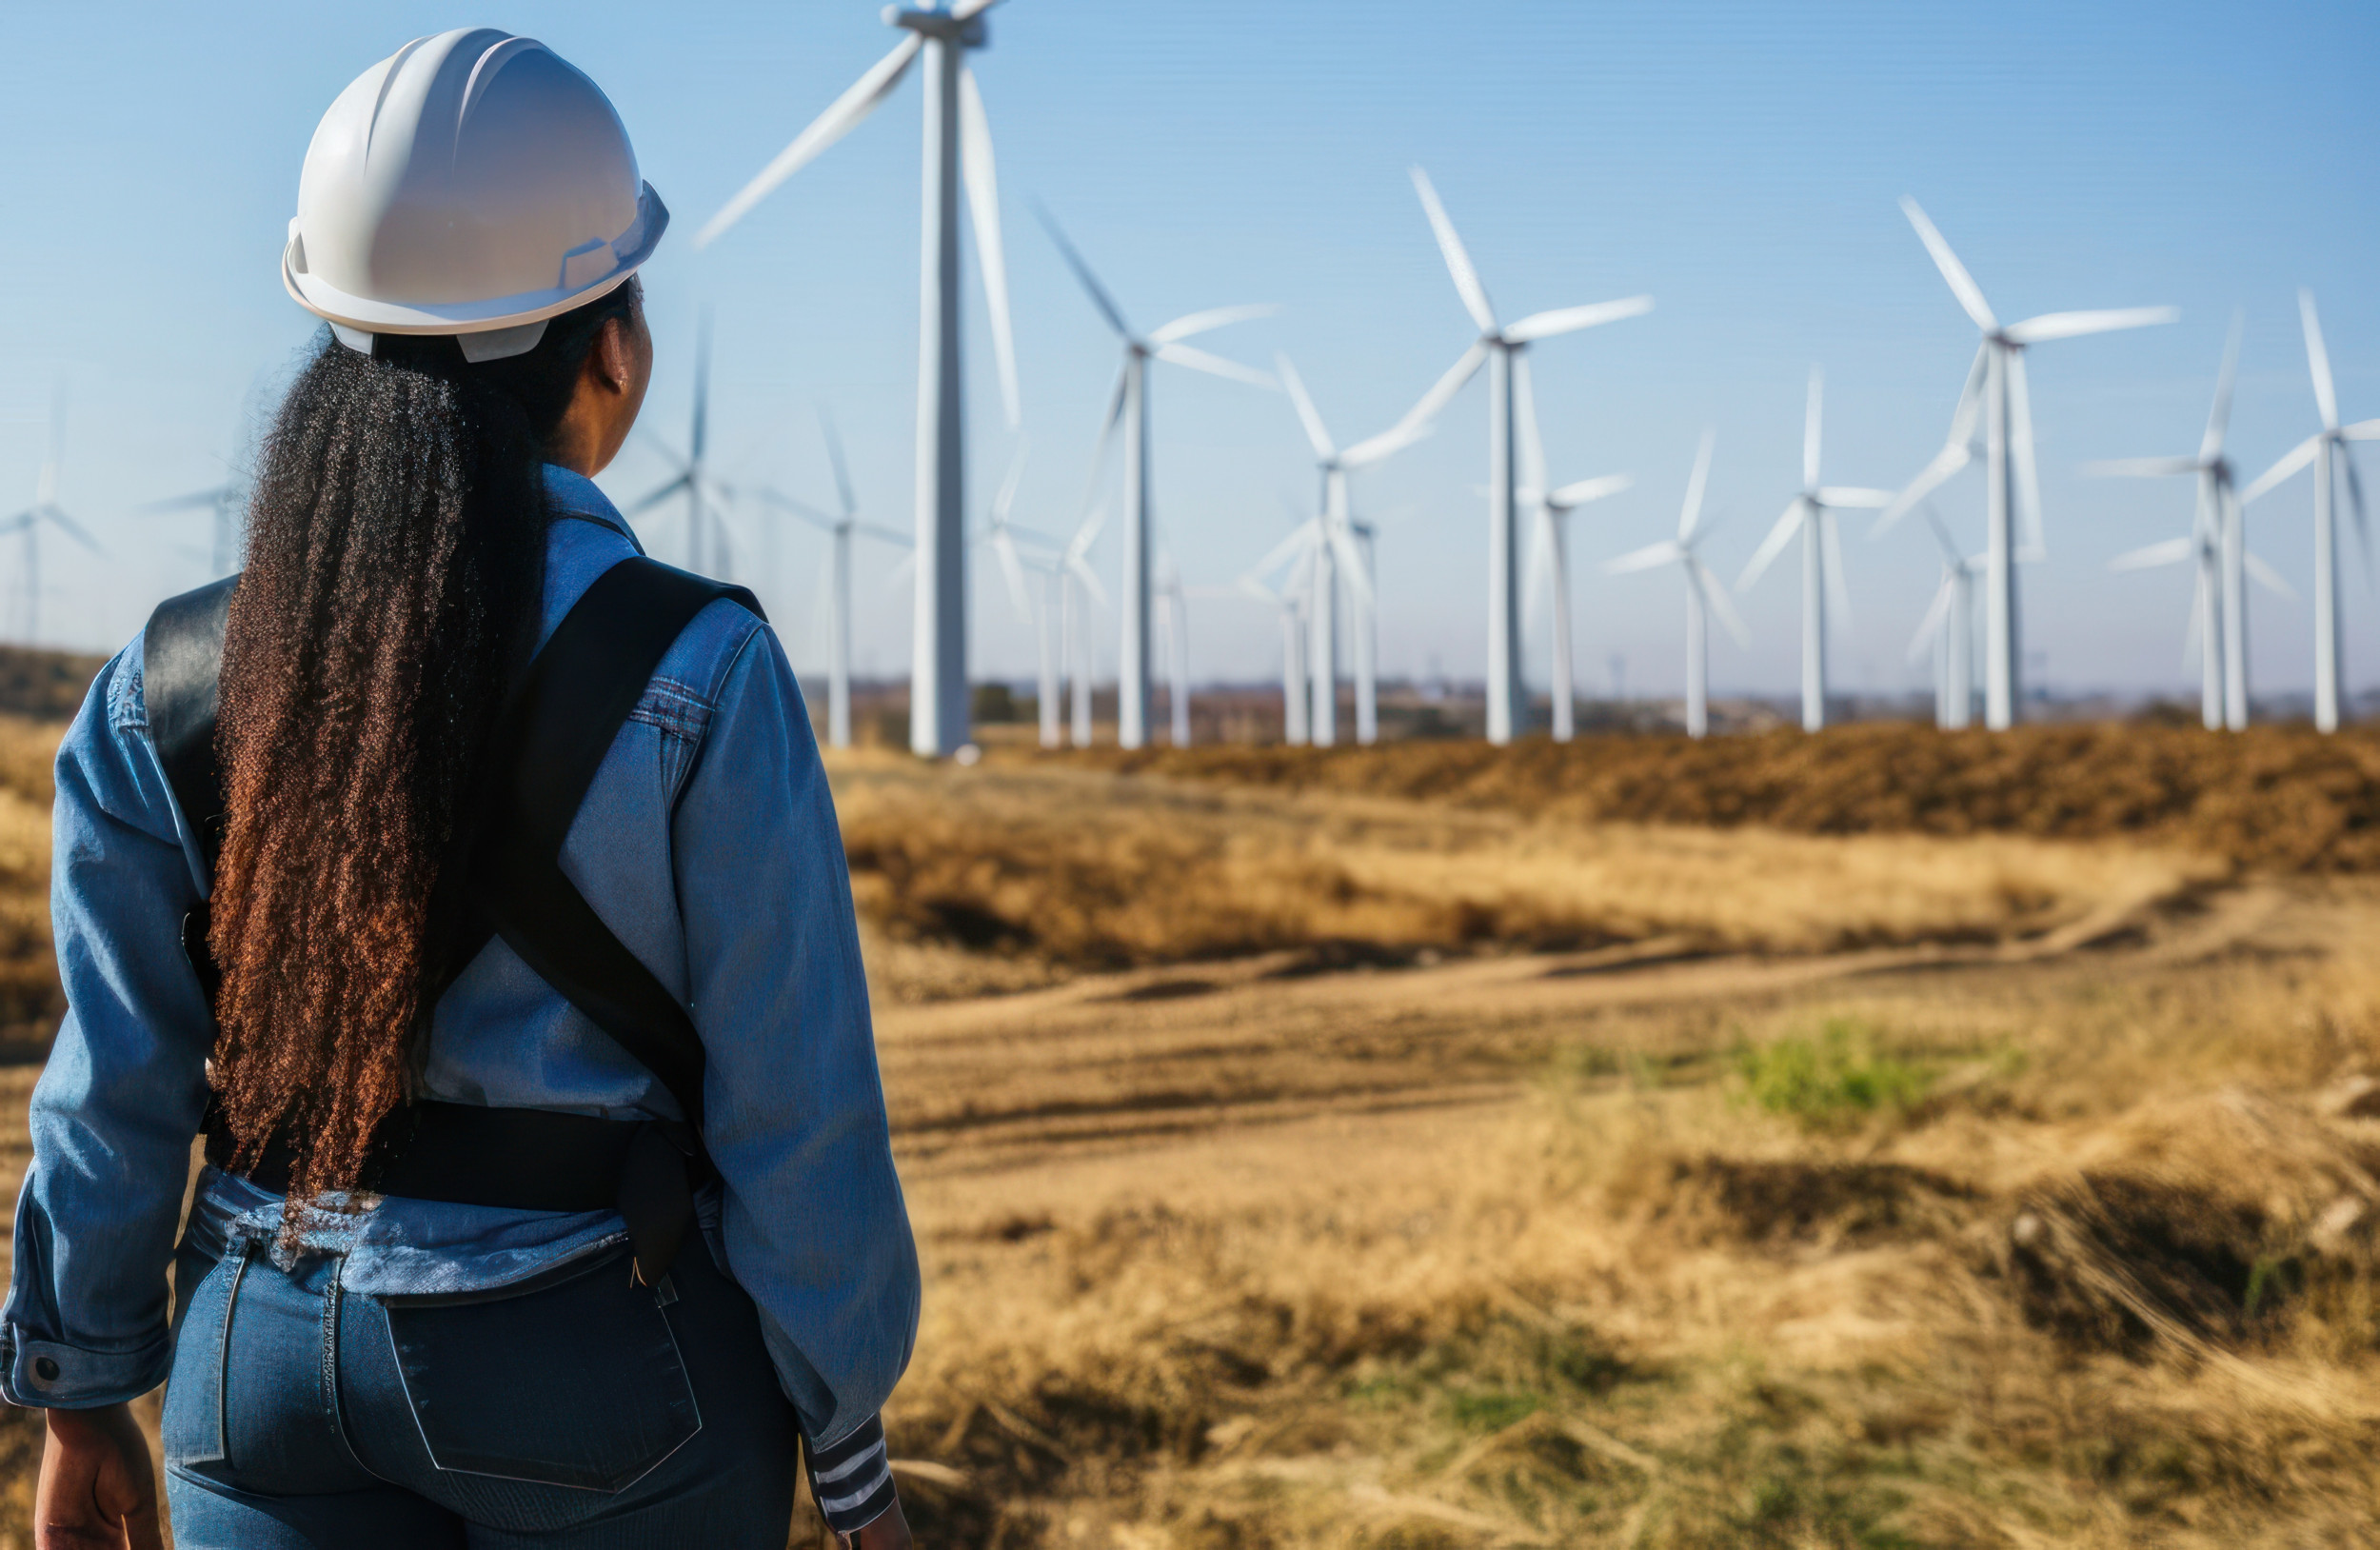 Fueling Fairness: How To Build an Equitable Clean Energy Workforce